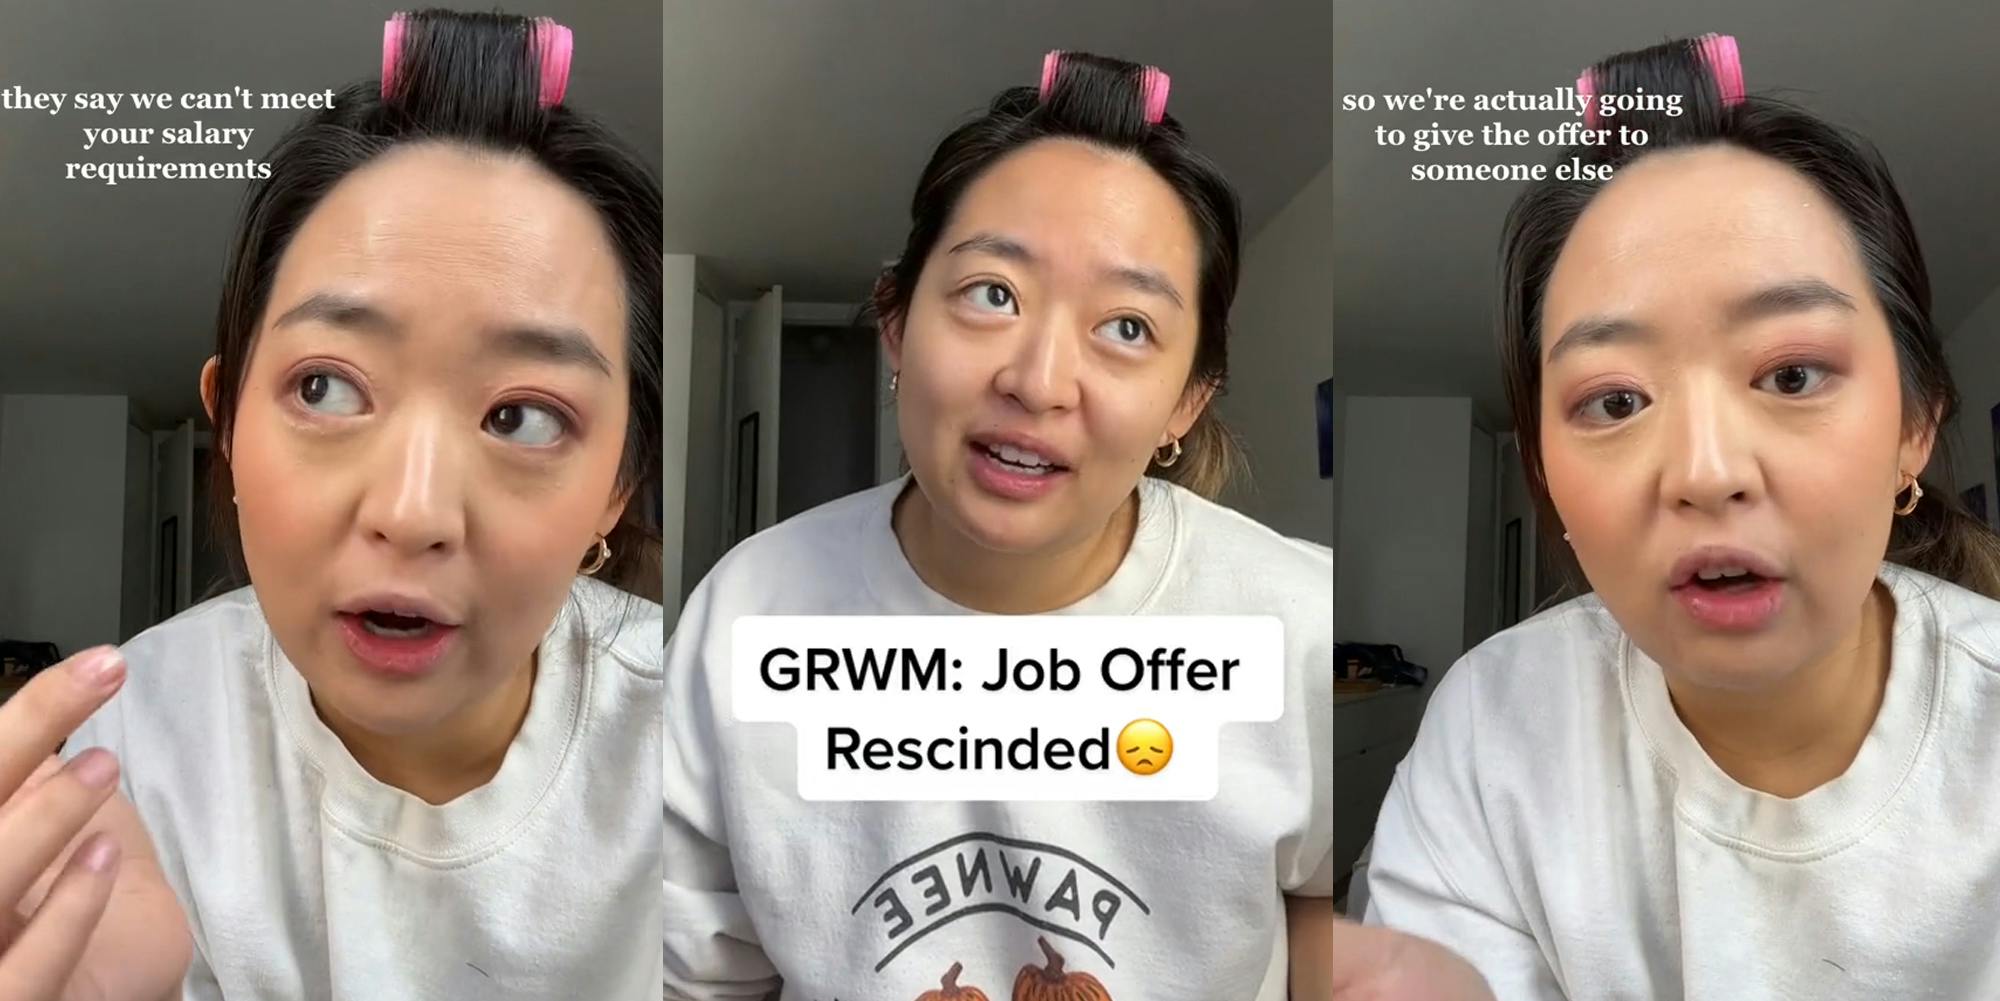 woman getting ready and speaking with caption "they say we can't meet your salary requirements" (l) woman getting ready and speaking with caption "GRWM: Job Offer Rescinded" (c) woman getting ready and speaking with caption "so we're actually going to give the offer to someone else" (r)